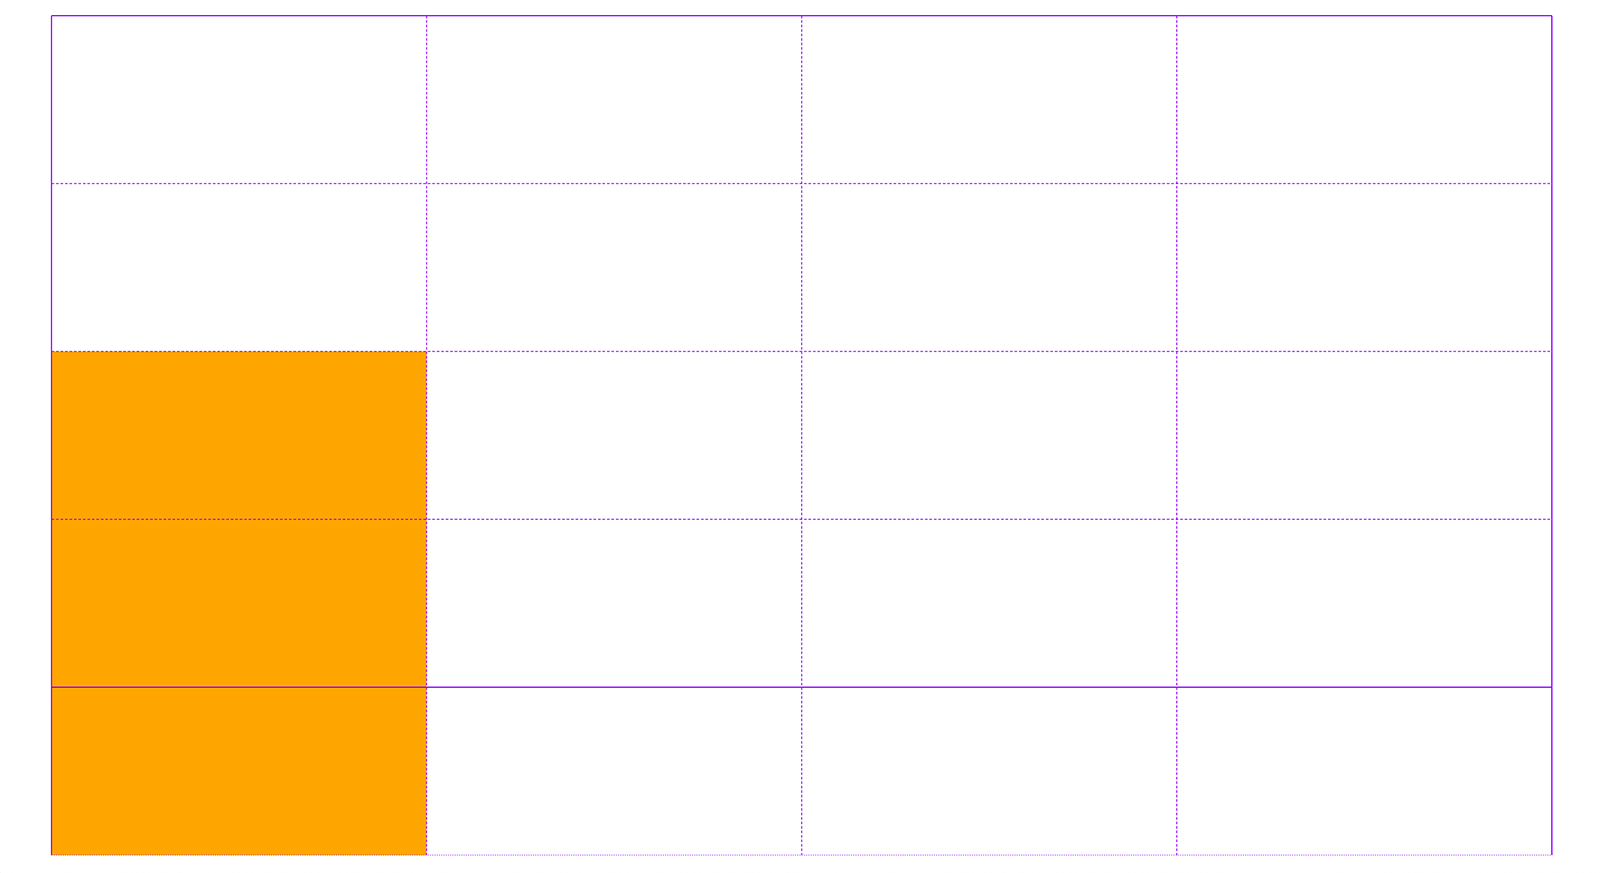 Orange grid item placed at the bottom left of the grid